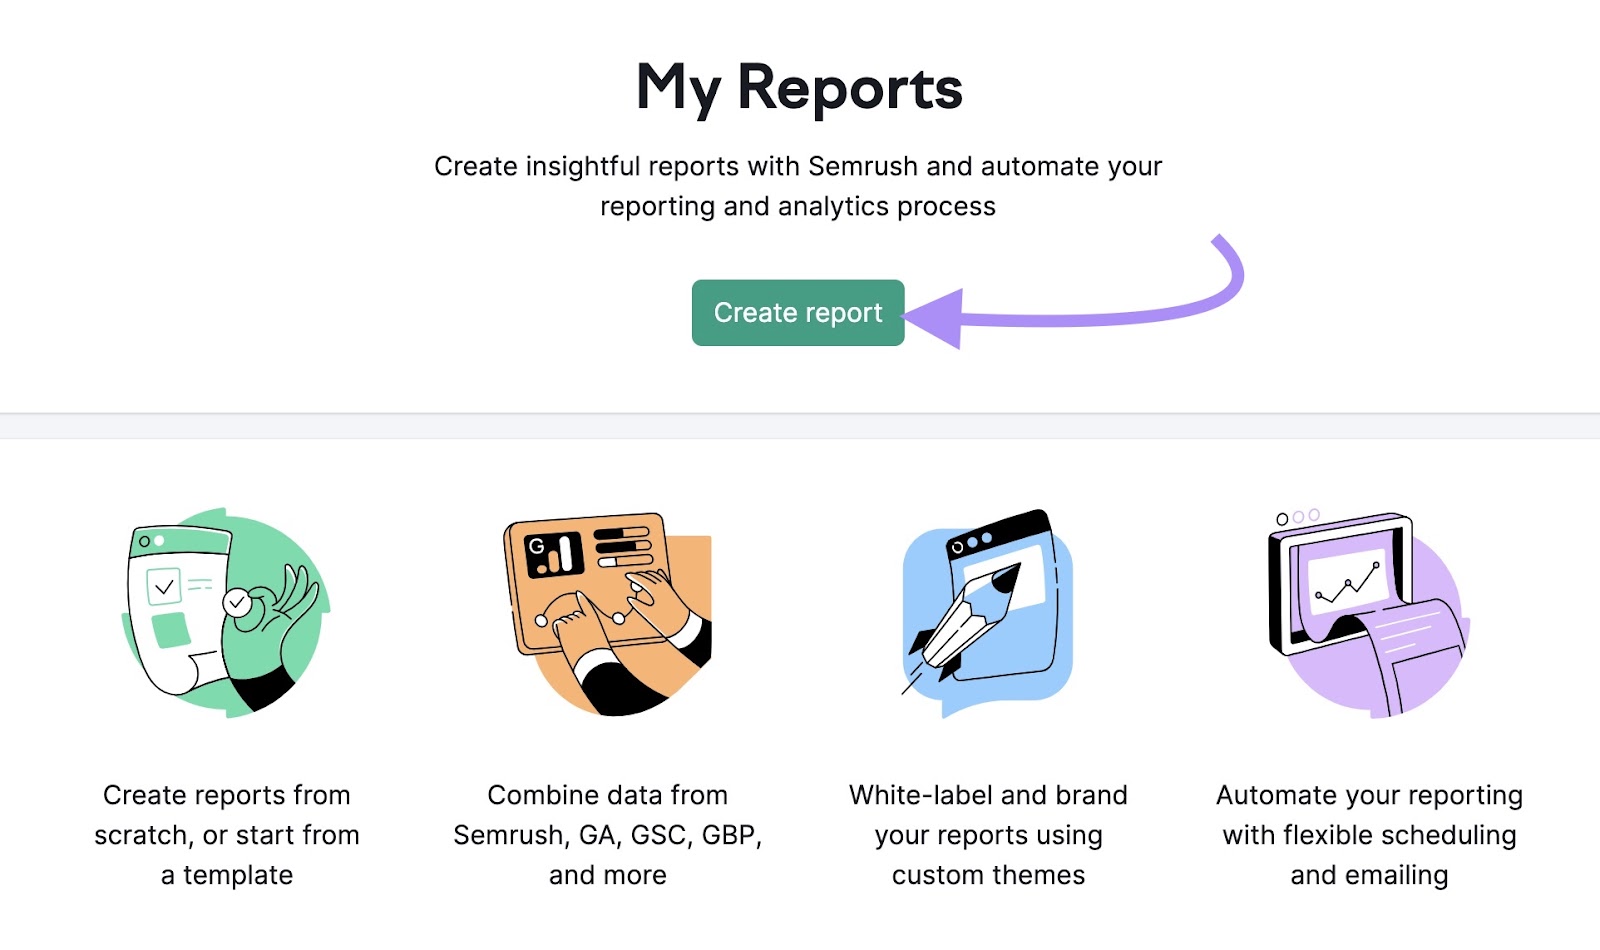 "Create report" button in My Reports tool